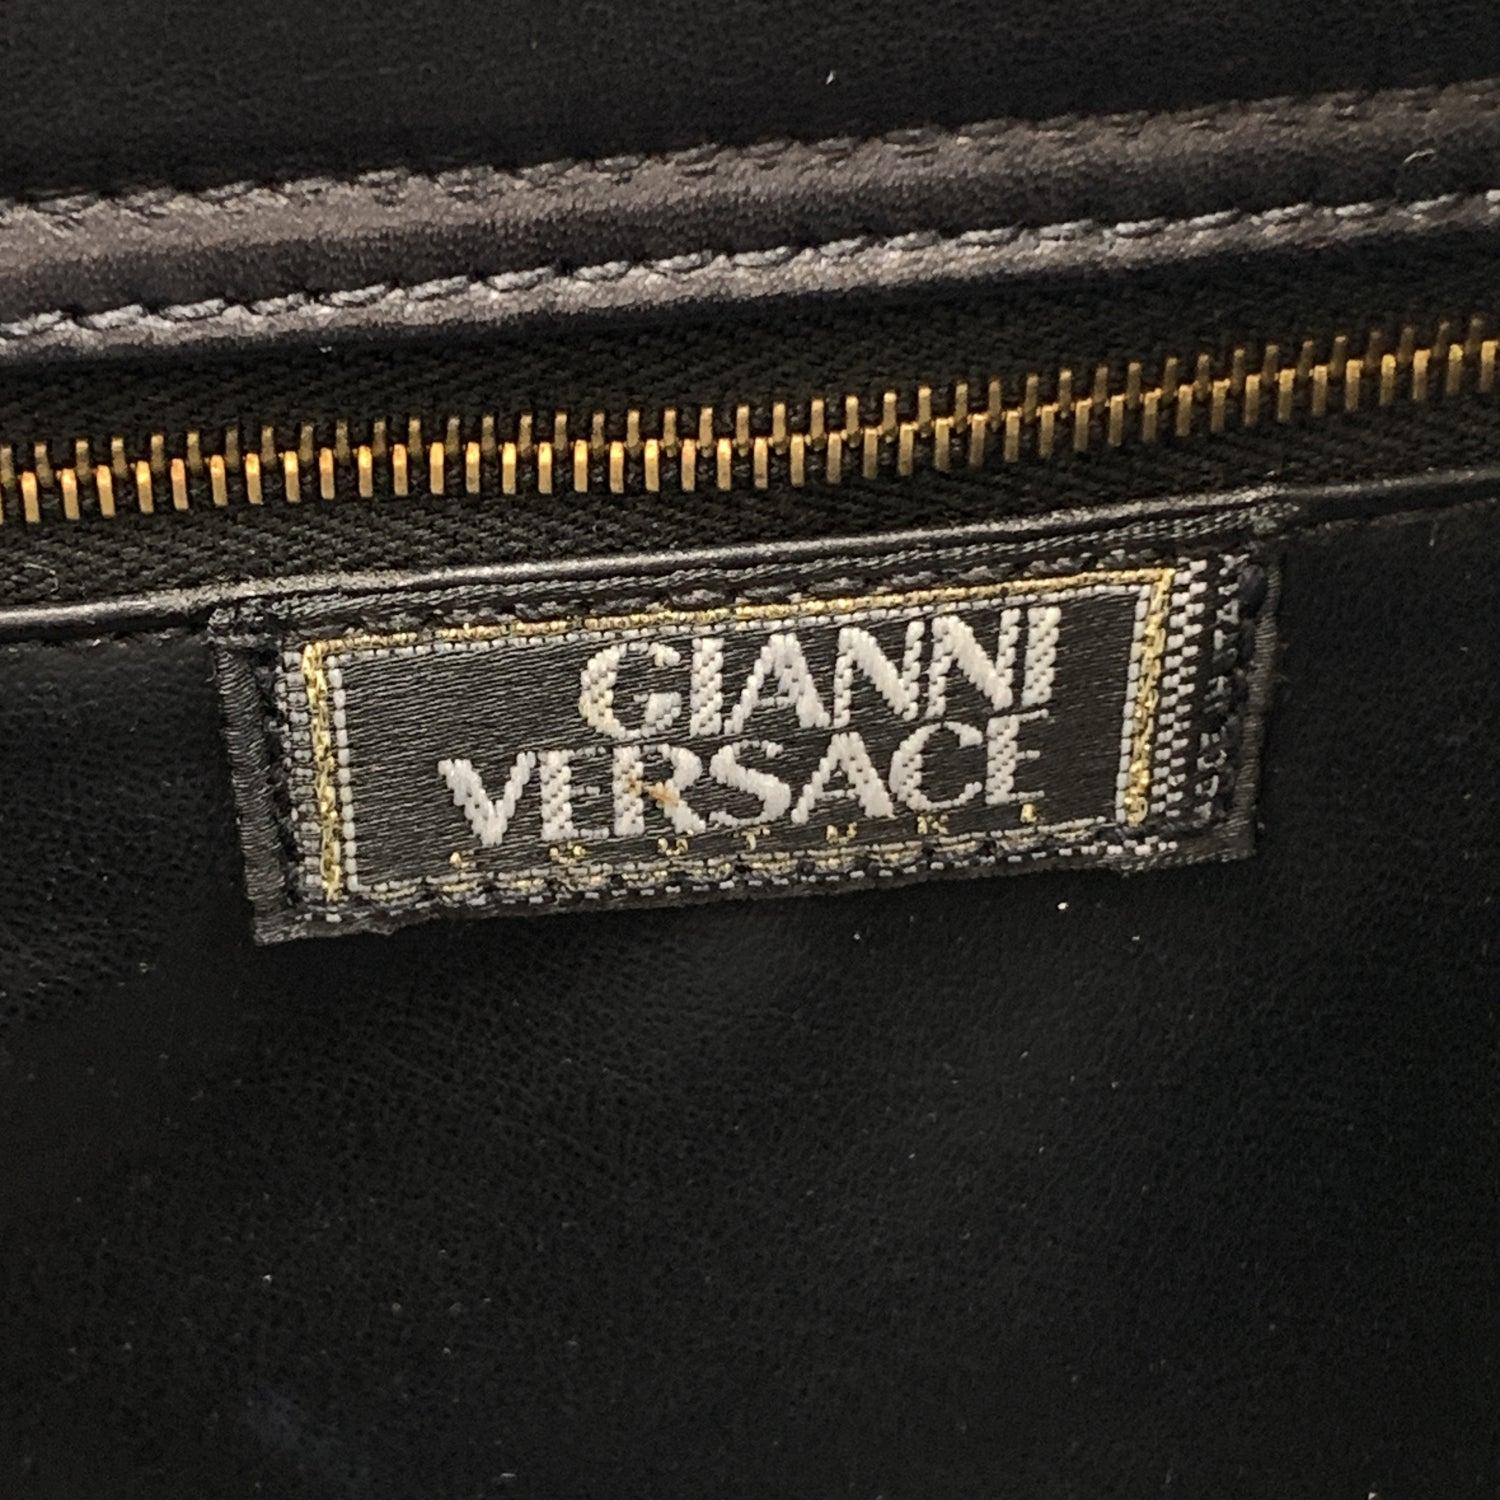 Gianni Versace Vintage Black Leather Stuctured Tote Bag 2